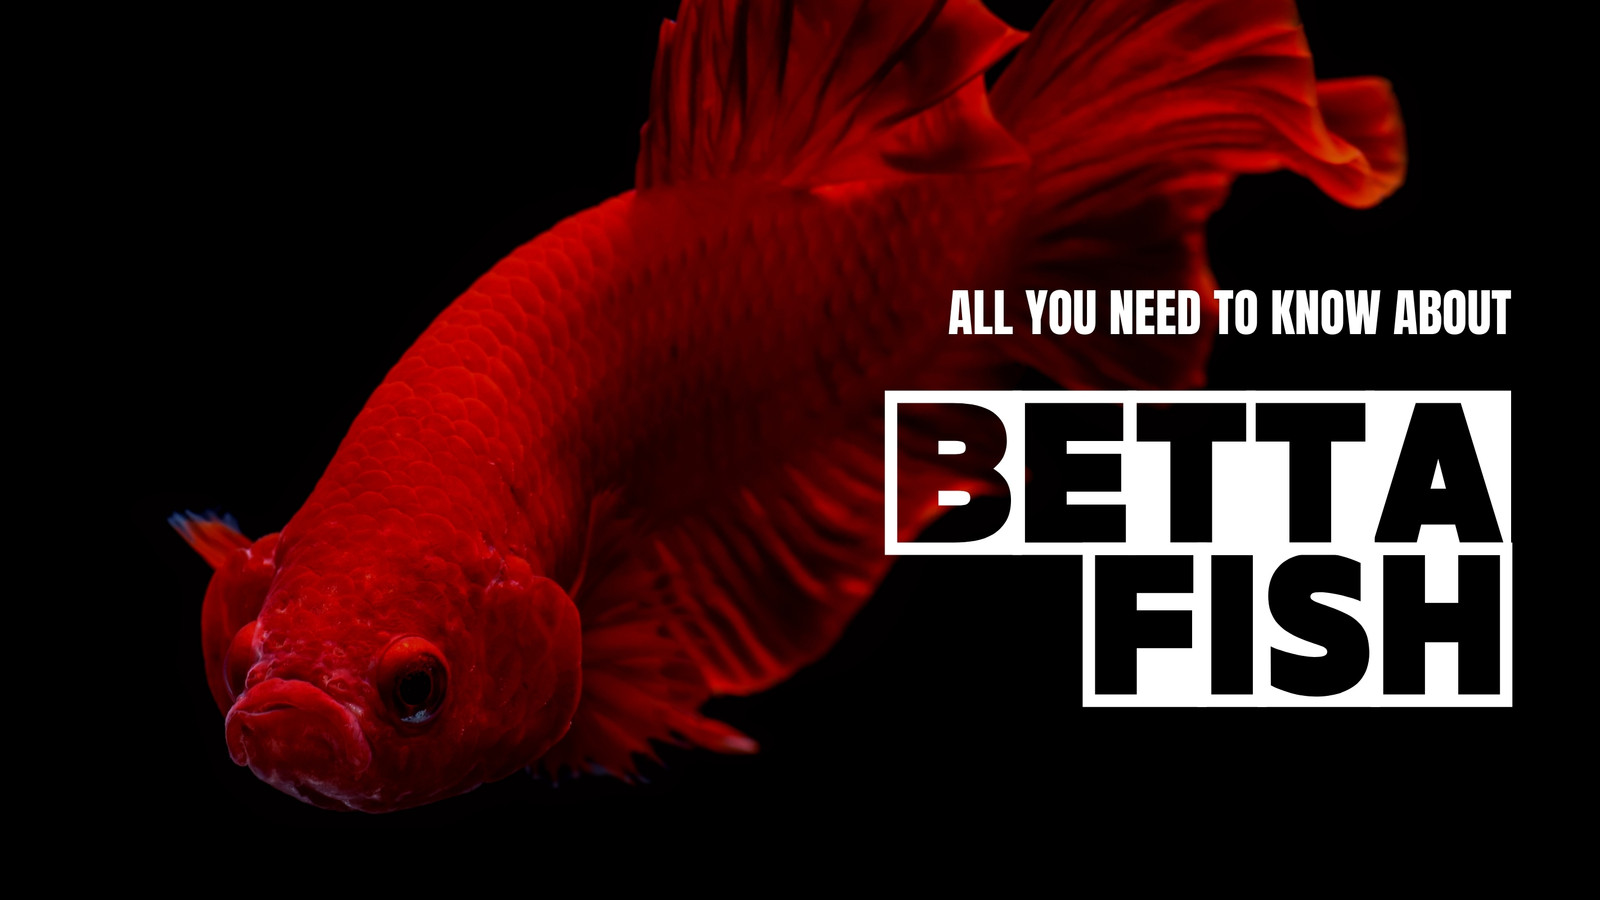 canva minimalist black and red betta fish illustration all you need to know youtube thumbnail bBXthHZp7LU